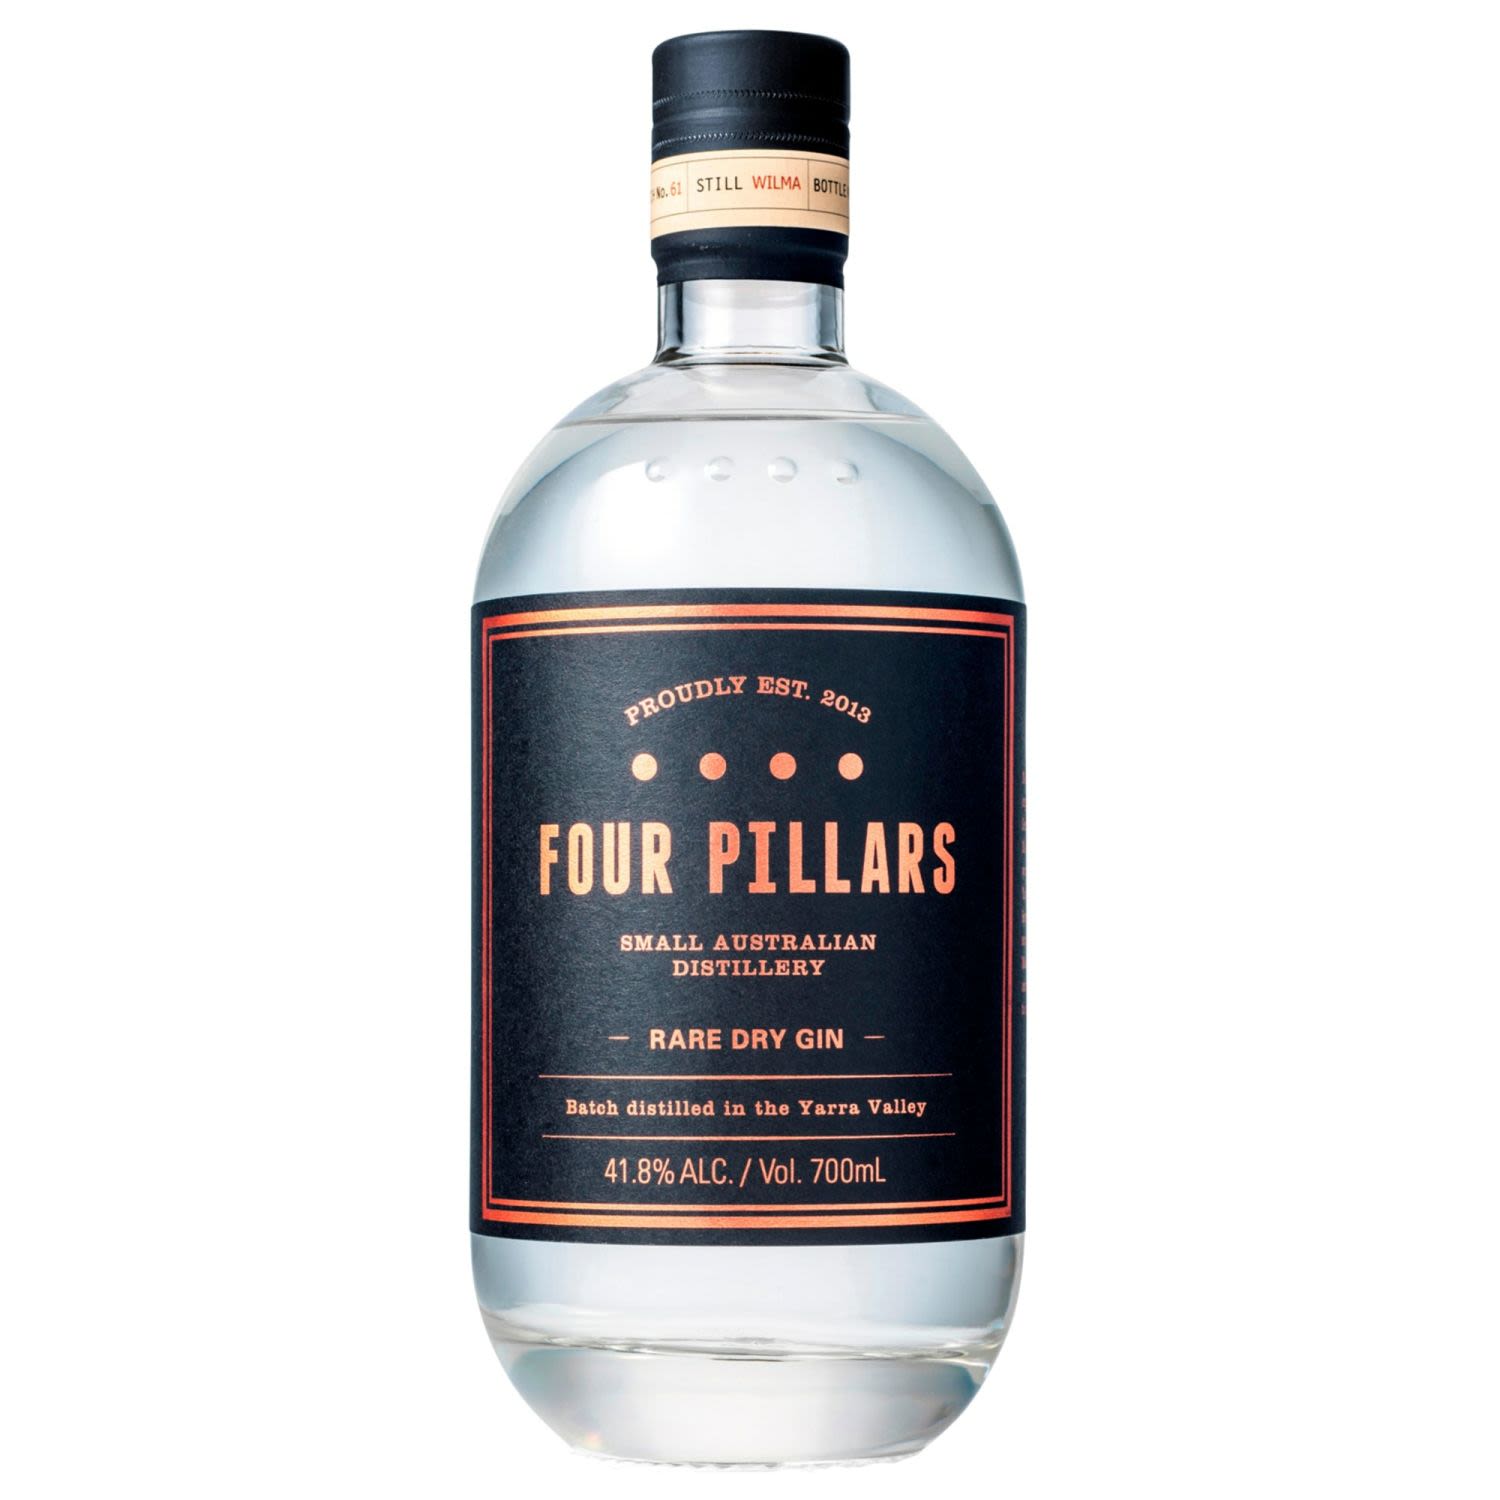 Four Pillars Rare Dry Gin is crafted to deliver the best of all worlds: a perfect, classic gin and also something that would fascinate even the most hardened gin fanatic. It's spicy but with great citrus, a truly modern Australian gin. Four Pillars Rare Dry Gin captures the essence of contemporary Australia's heritage in Europe and Asia. They are using whole oranges which is unusual but Australian citrus is highly aromatic and supports the spicier botanicals like cardamom. The cinnamon and star anise add rich fruitcake tones, the Tasmanian pepperberry leaf provides warmth rather than heat, and the lemon myrtle is a beautiful alternative to lemon peel.<br /> <br />Alcohol Volume: 41.80%<br /><br />Pack Format: Bottle<br /><br />Standard Drinks: 23.1</br /><br />Pack Type: Bottle<br /><br />Country of Origin: Australia<br />